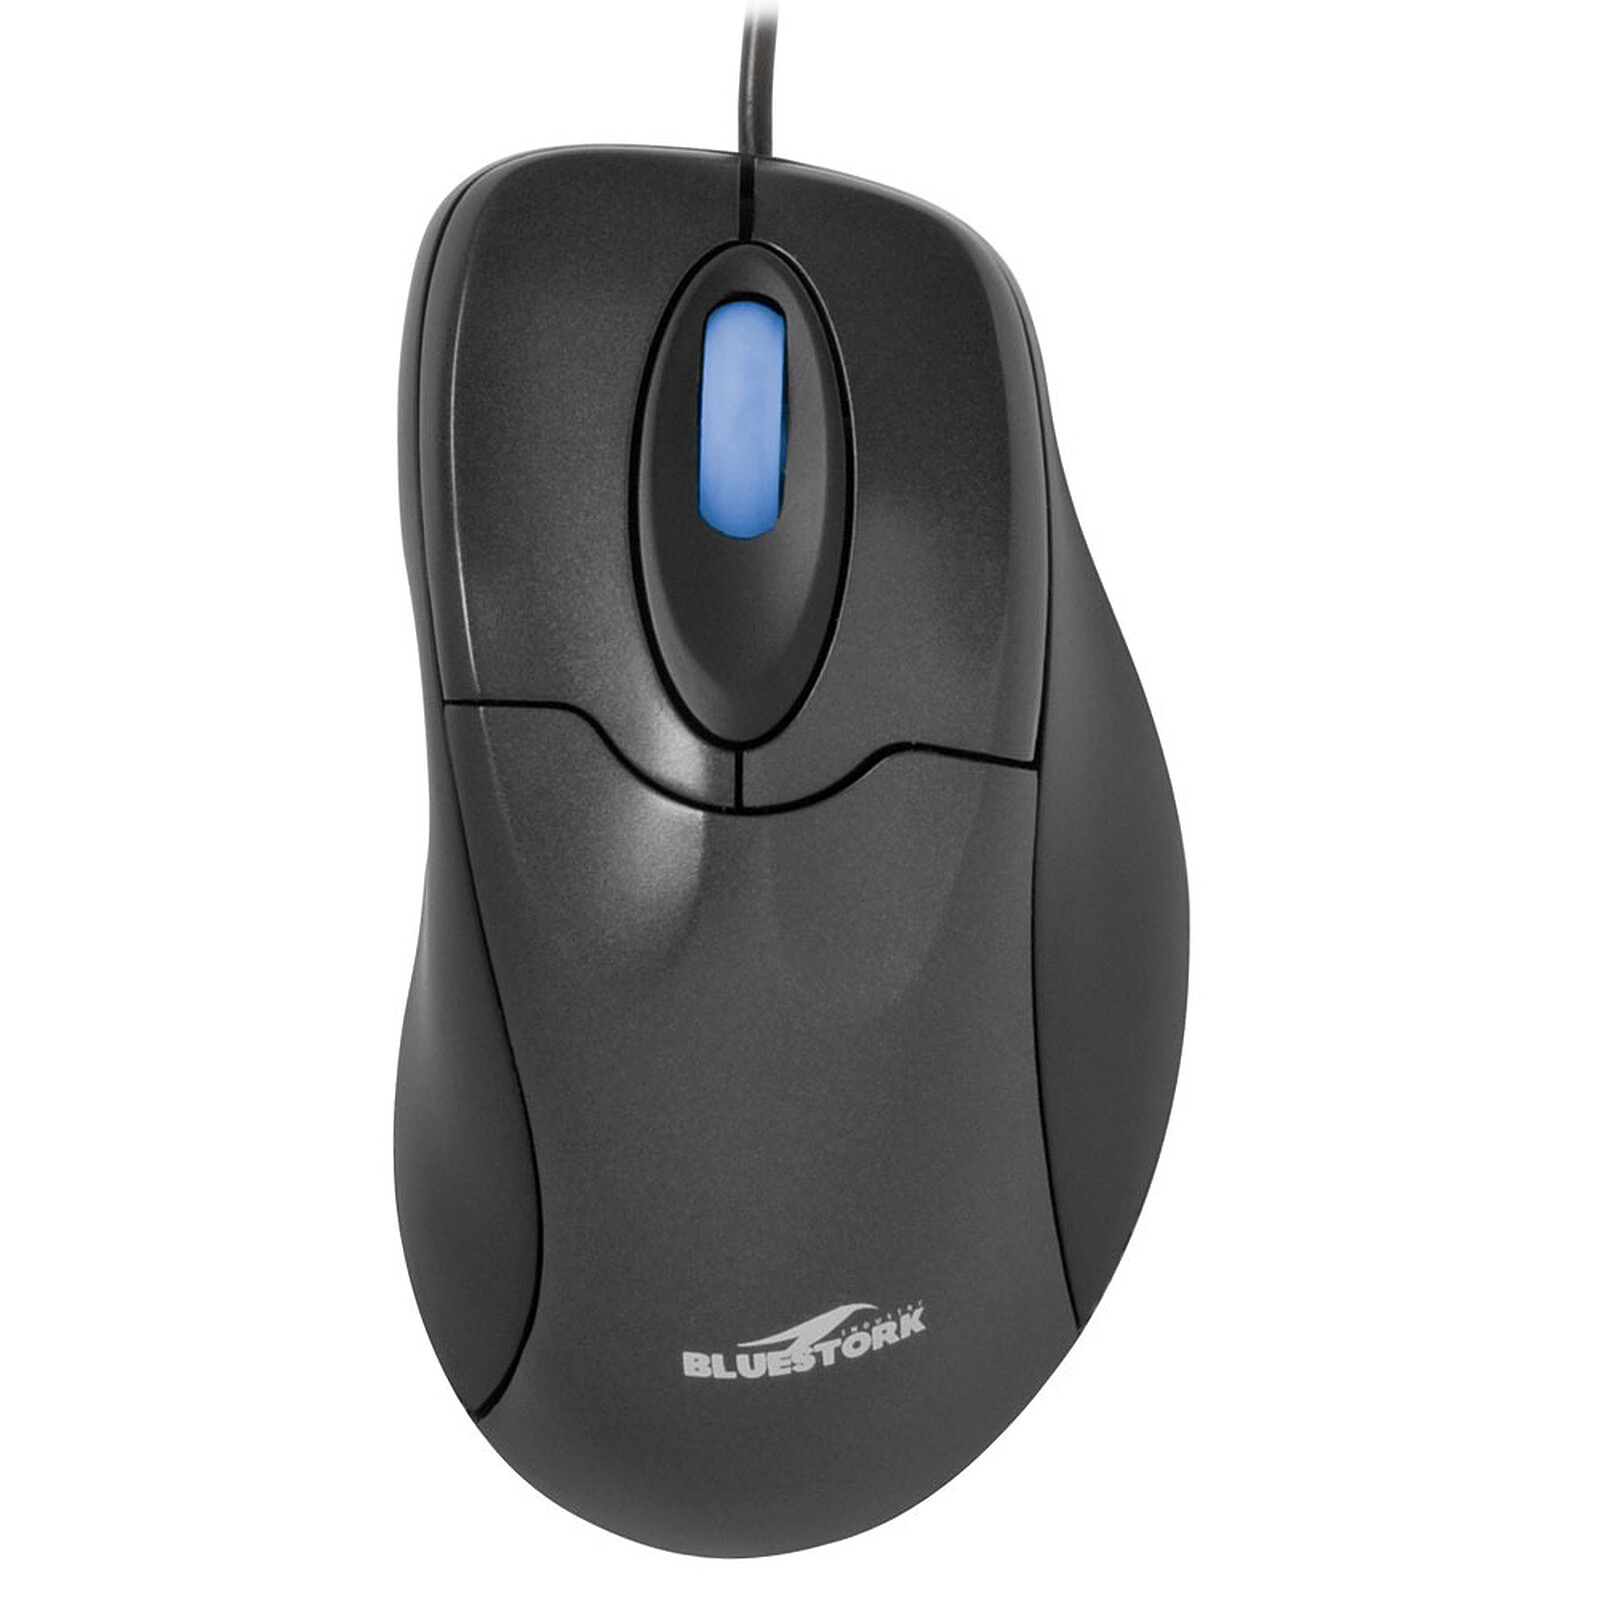 G2 mouse. Mouse point.